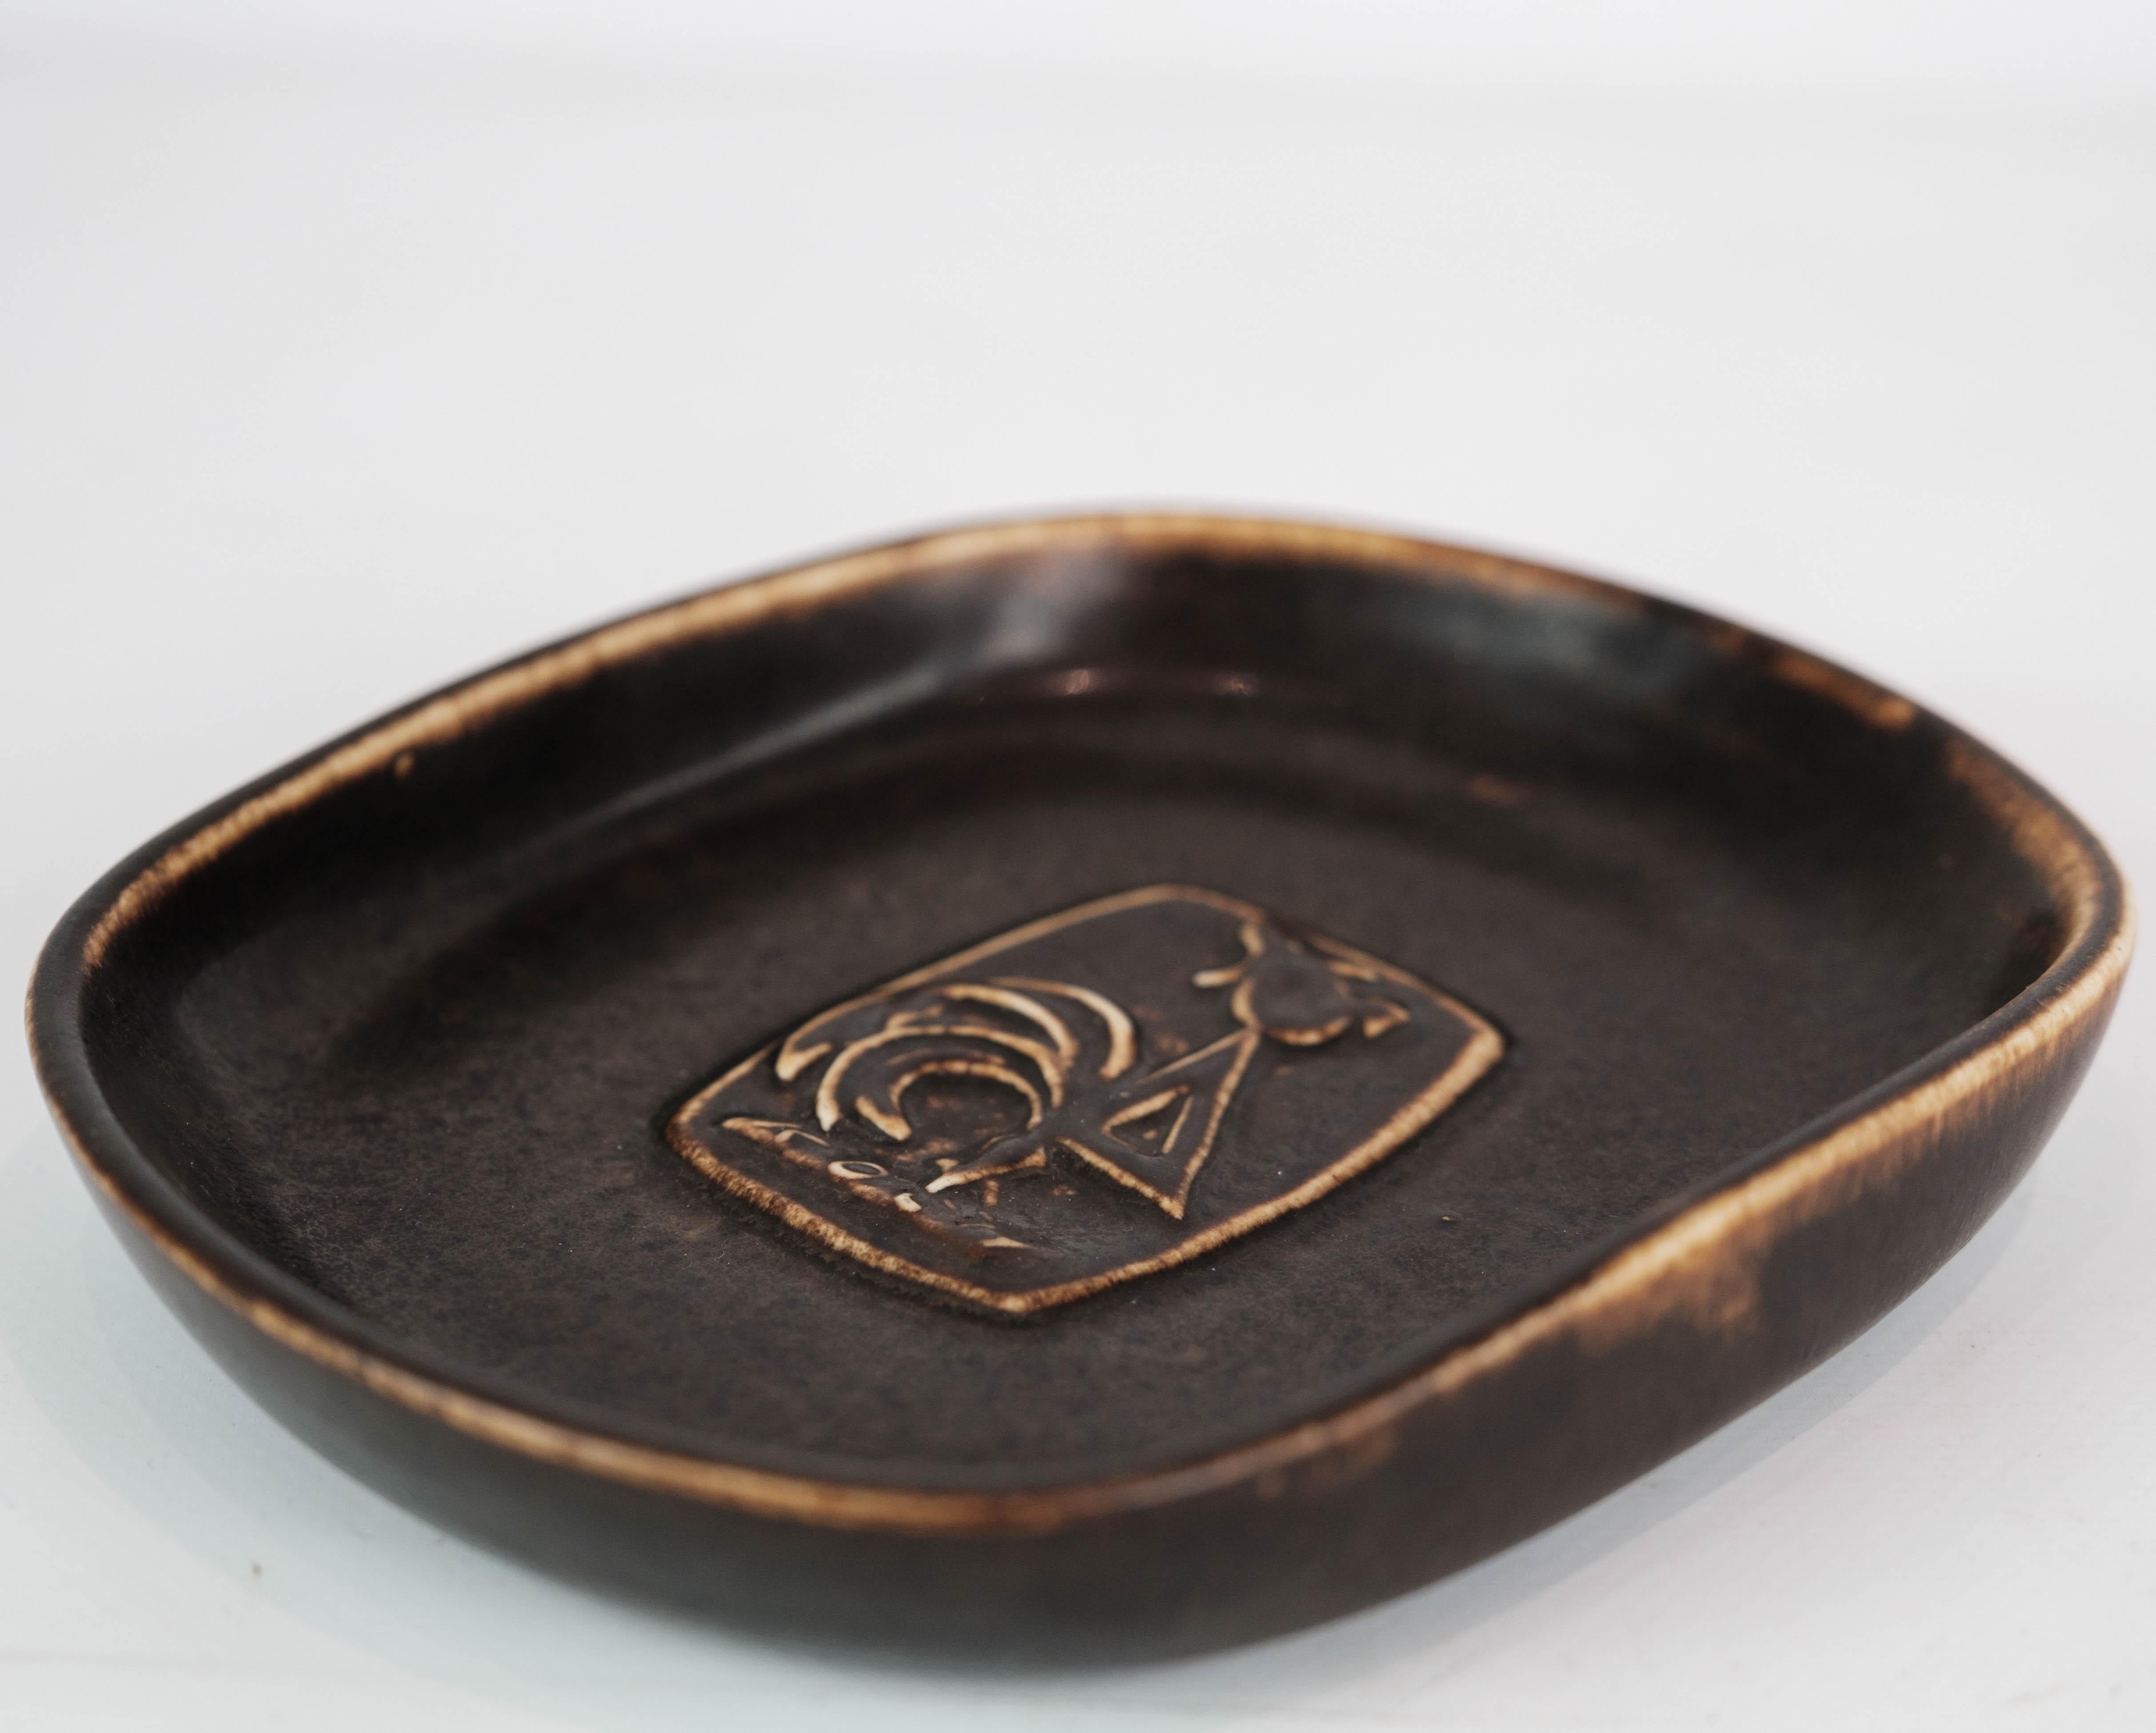 Ceramic dish in brown colors by the artist Eva Stæhr-Nielsen for Saxbo. The dish is in great vintage condition.